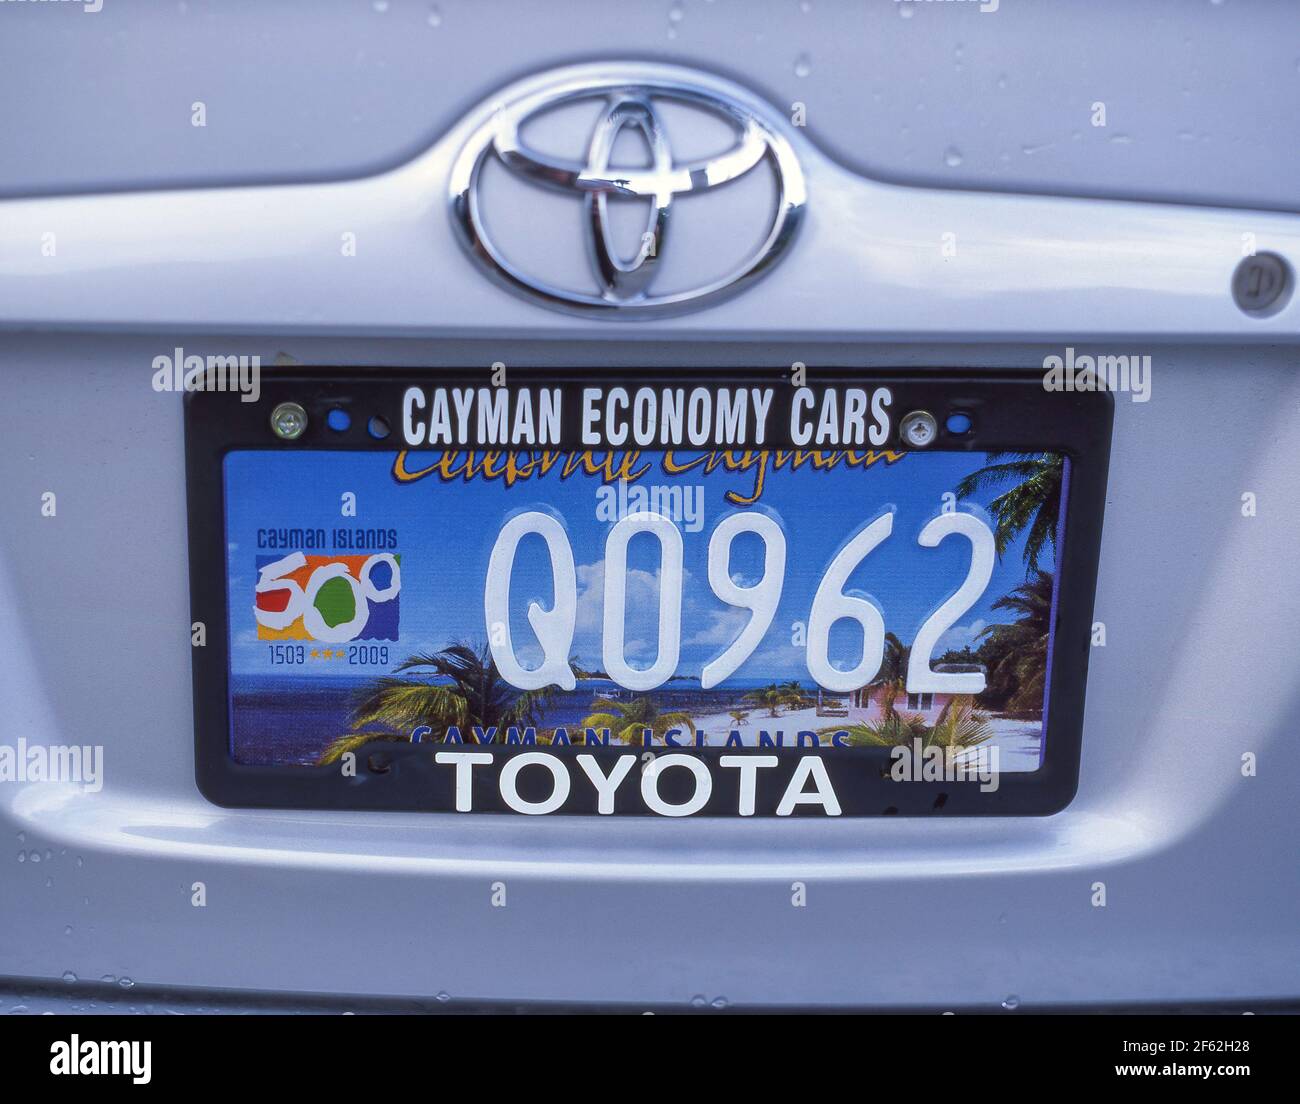 Cayman Island car number plate, George Town, Grand Cayman, Cayman Islands, Greater Antilles, Caribbean Stock Photo